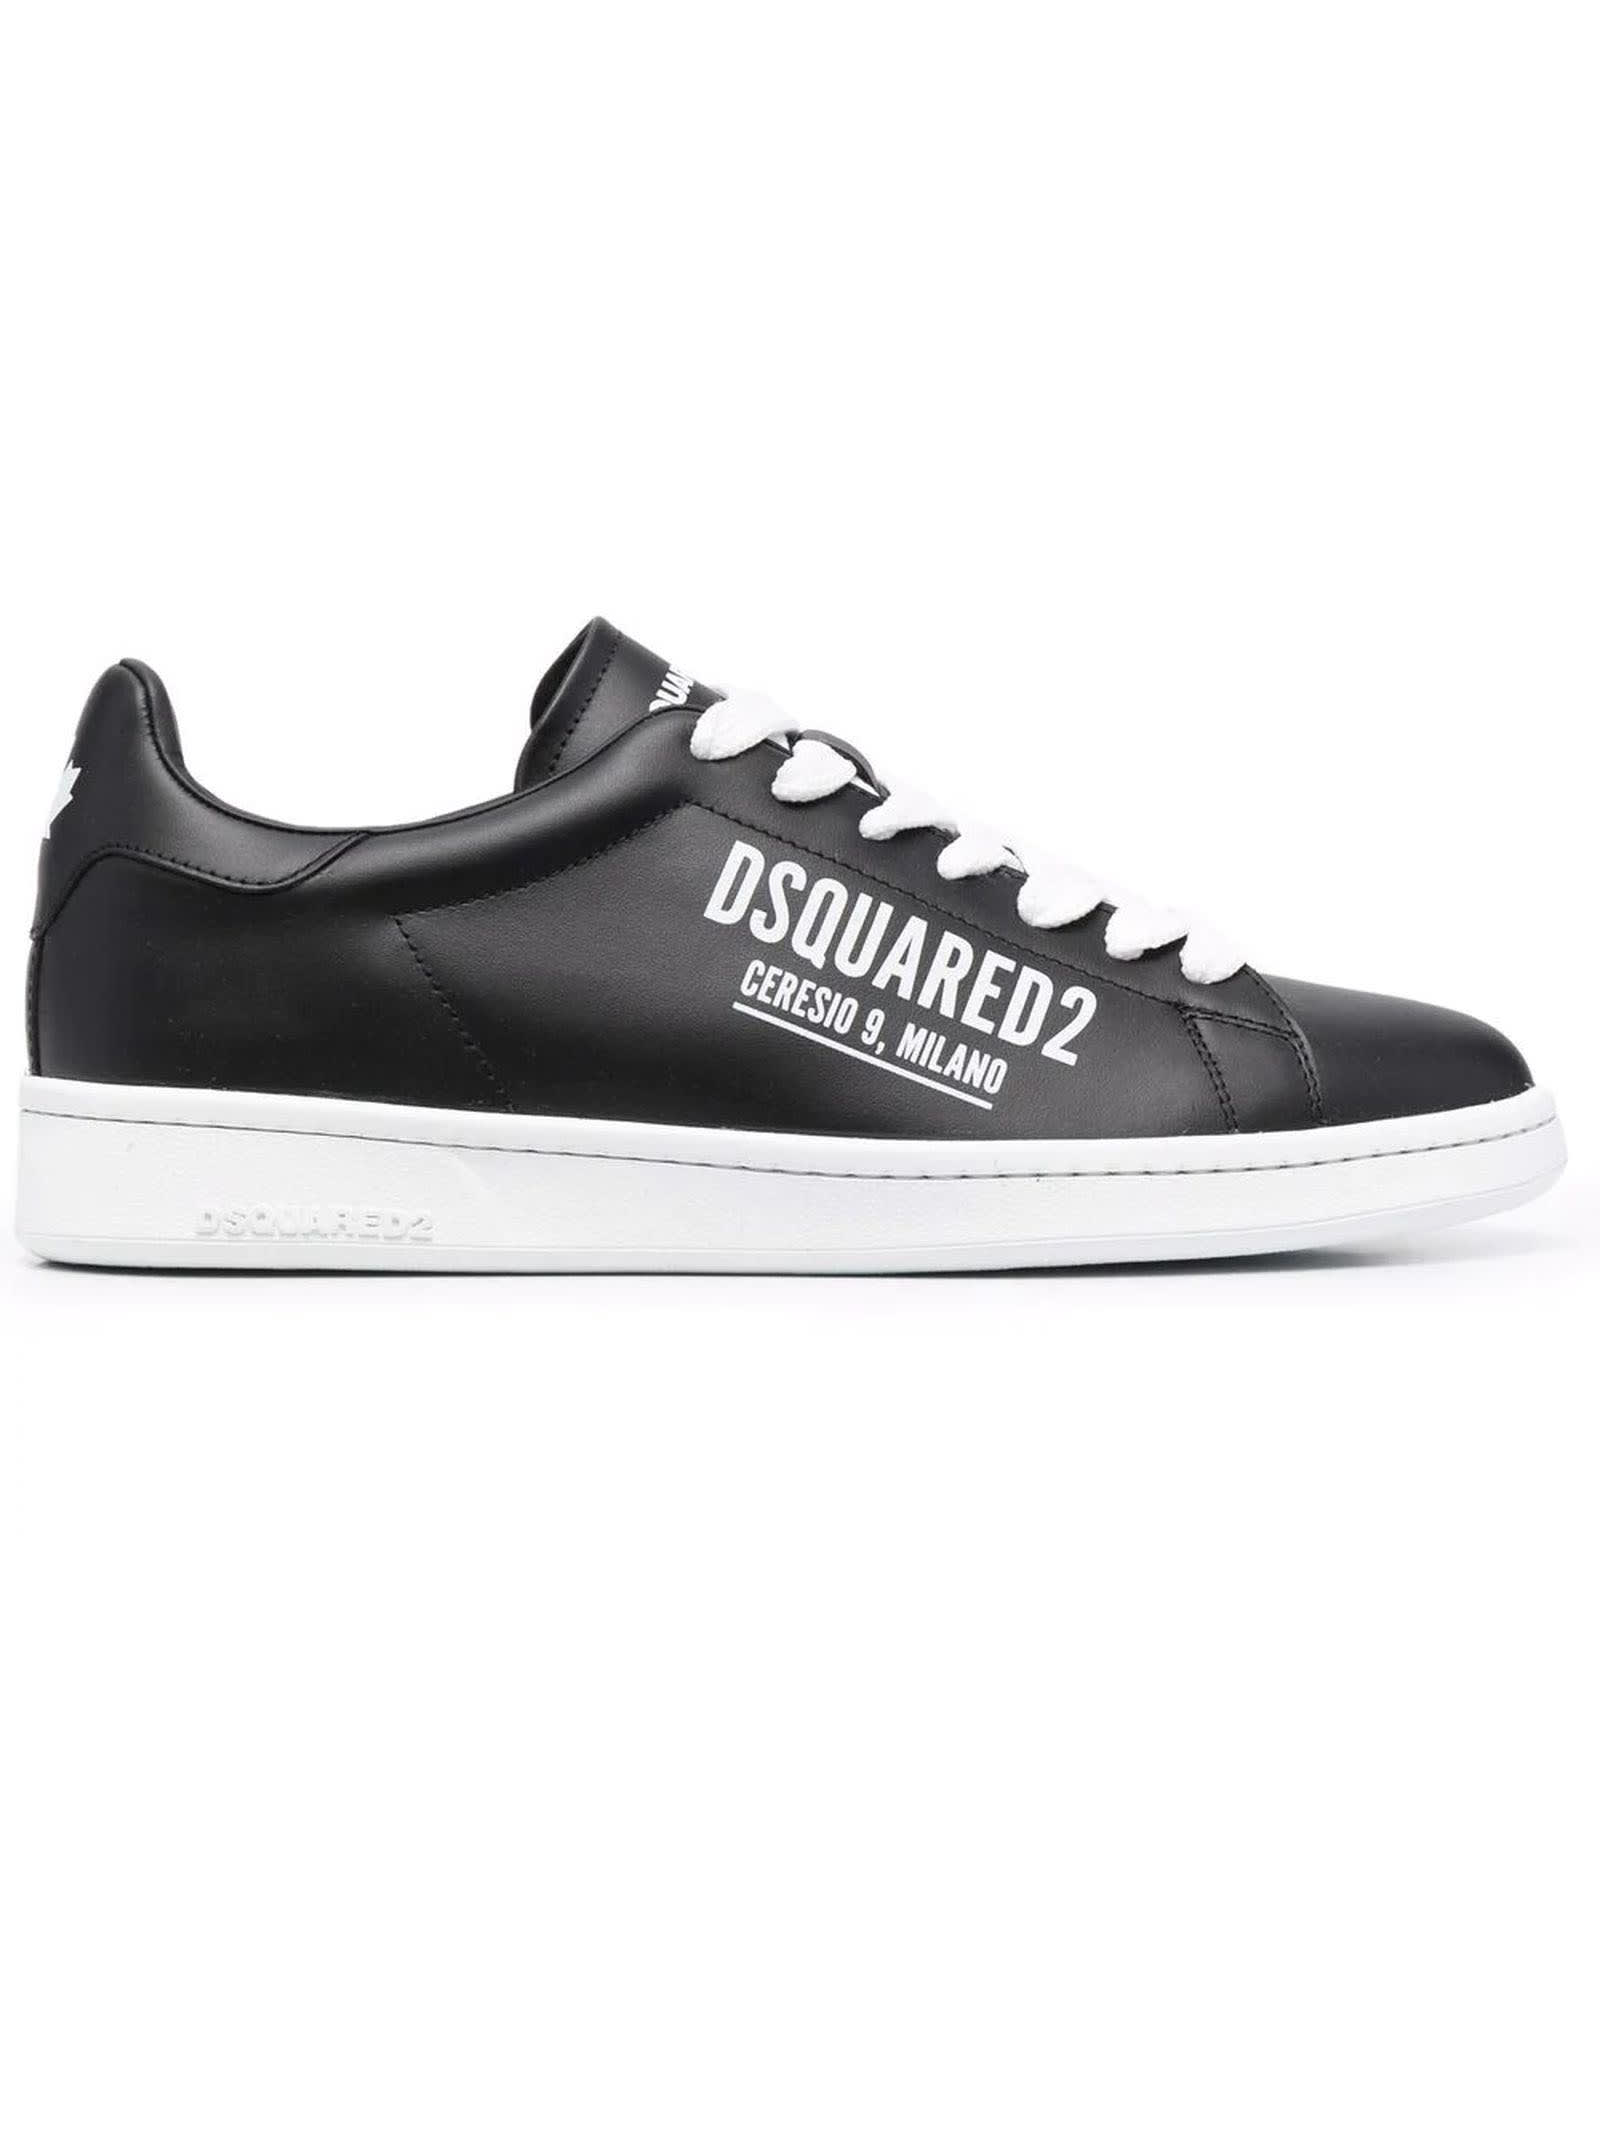 Dsquared2 Black Calf Leather Sneakers